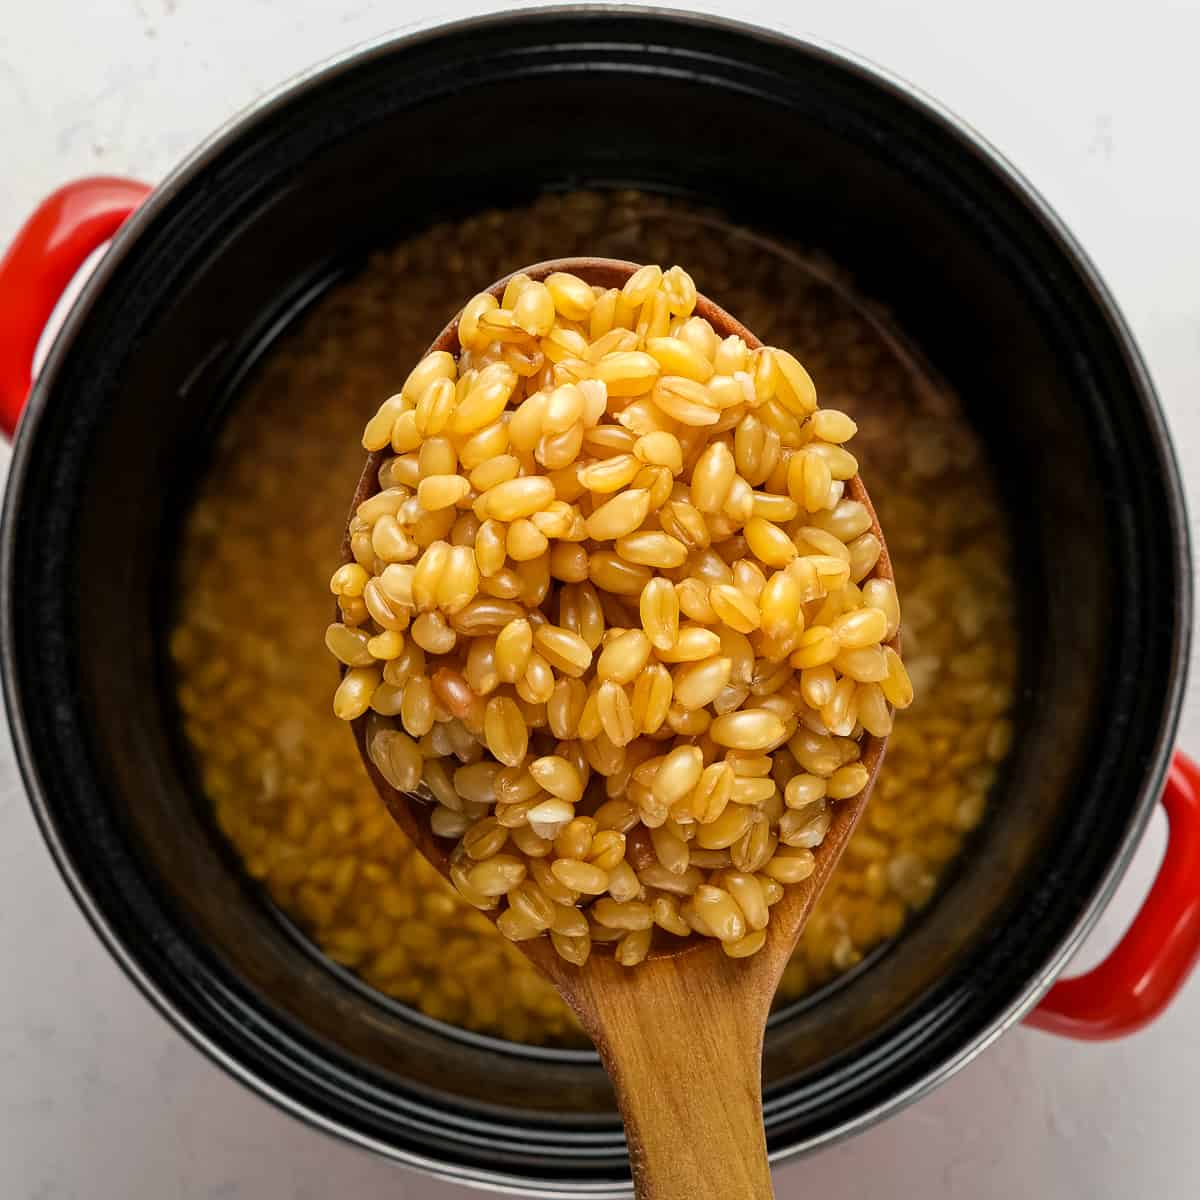 How To Cook Wheat Berries In A Rice Cooker